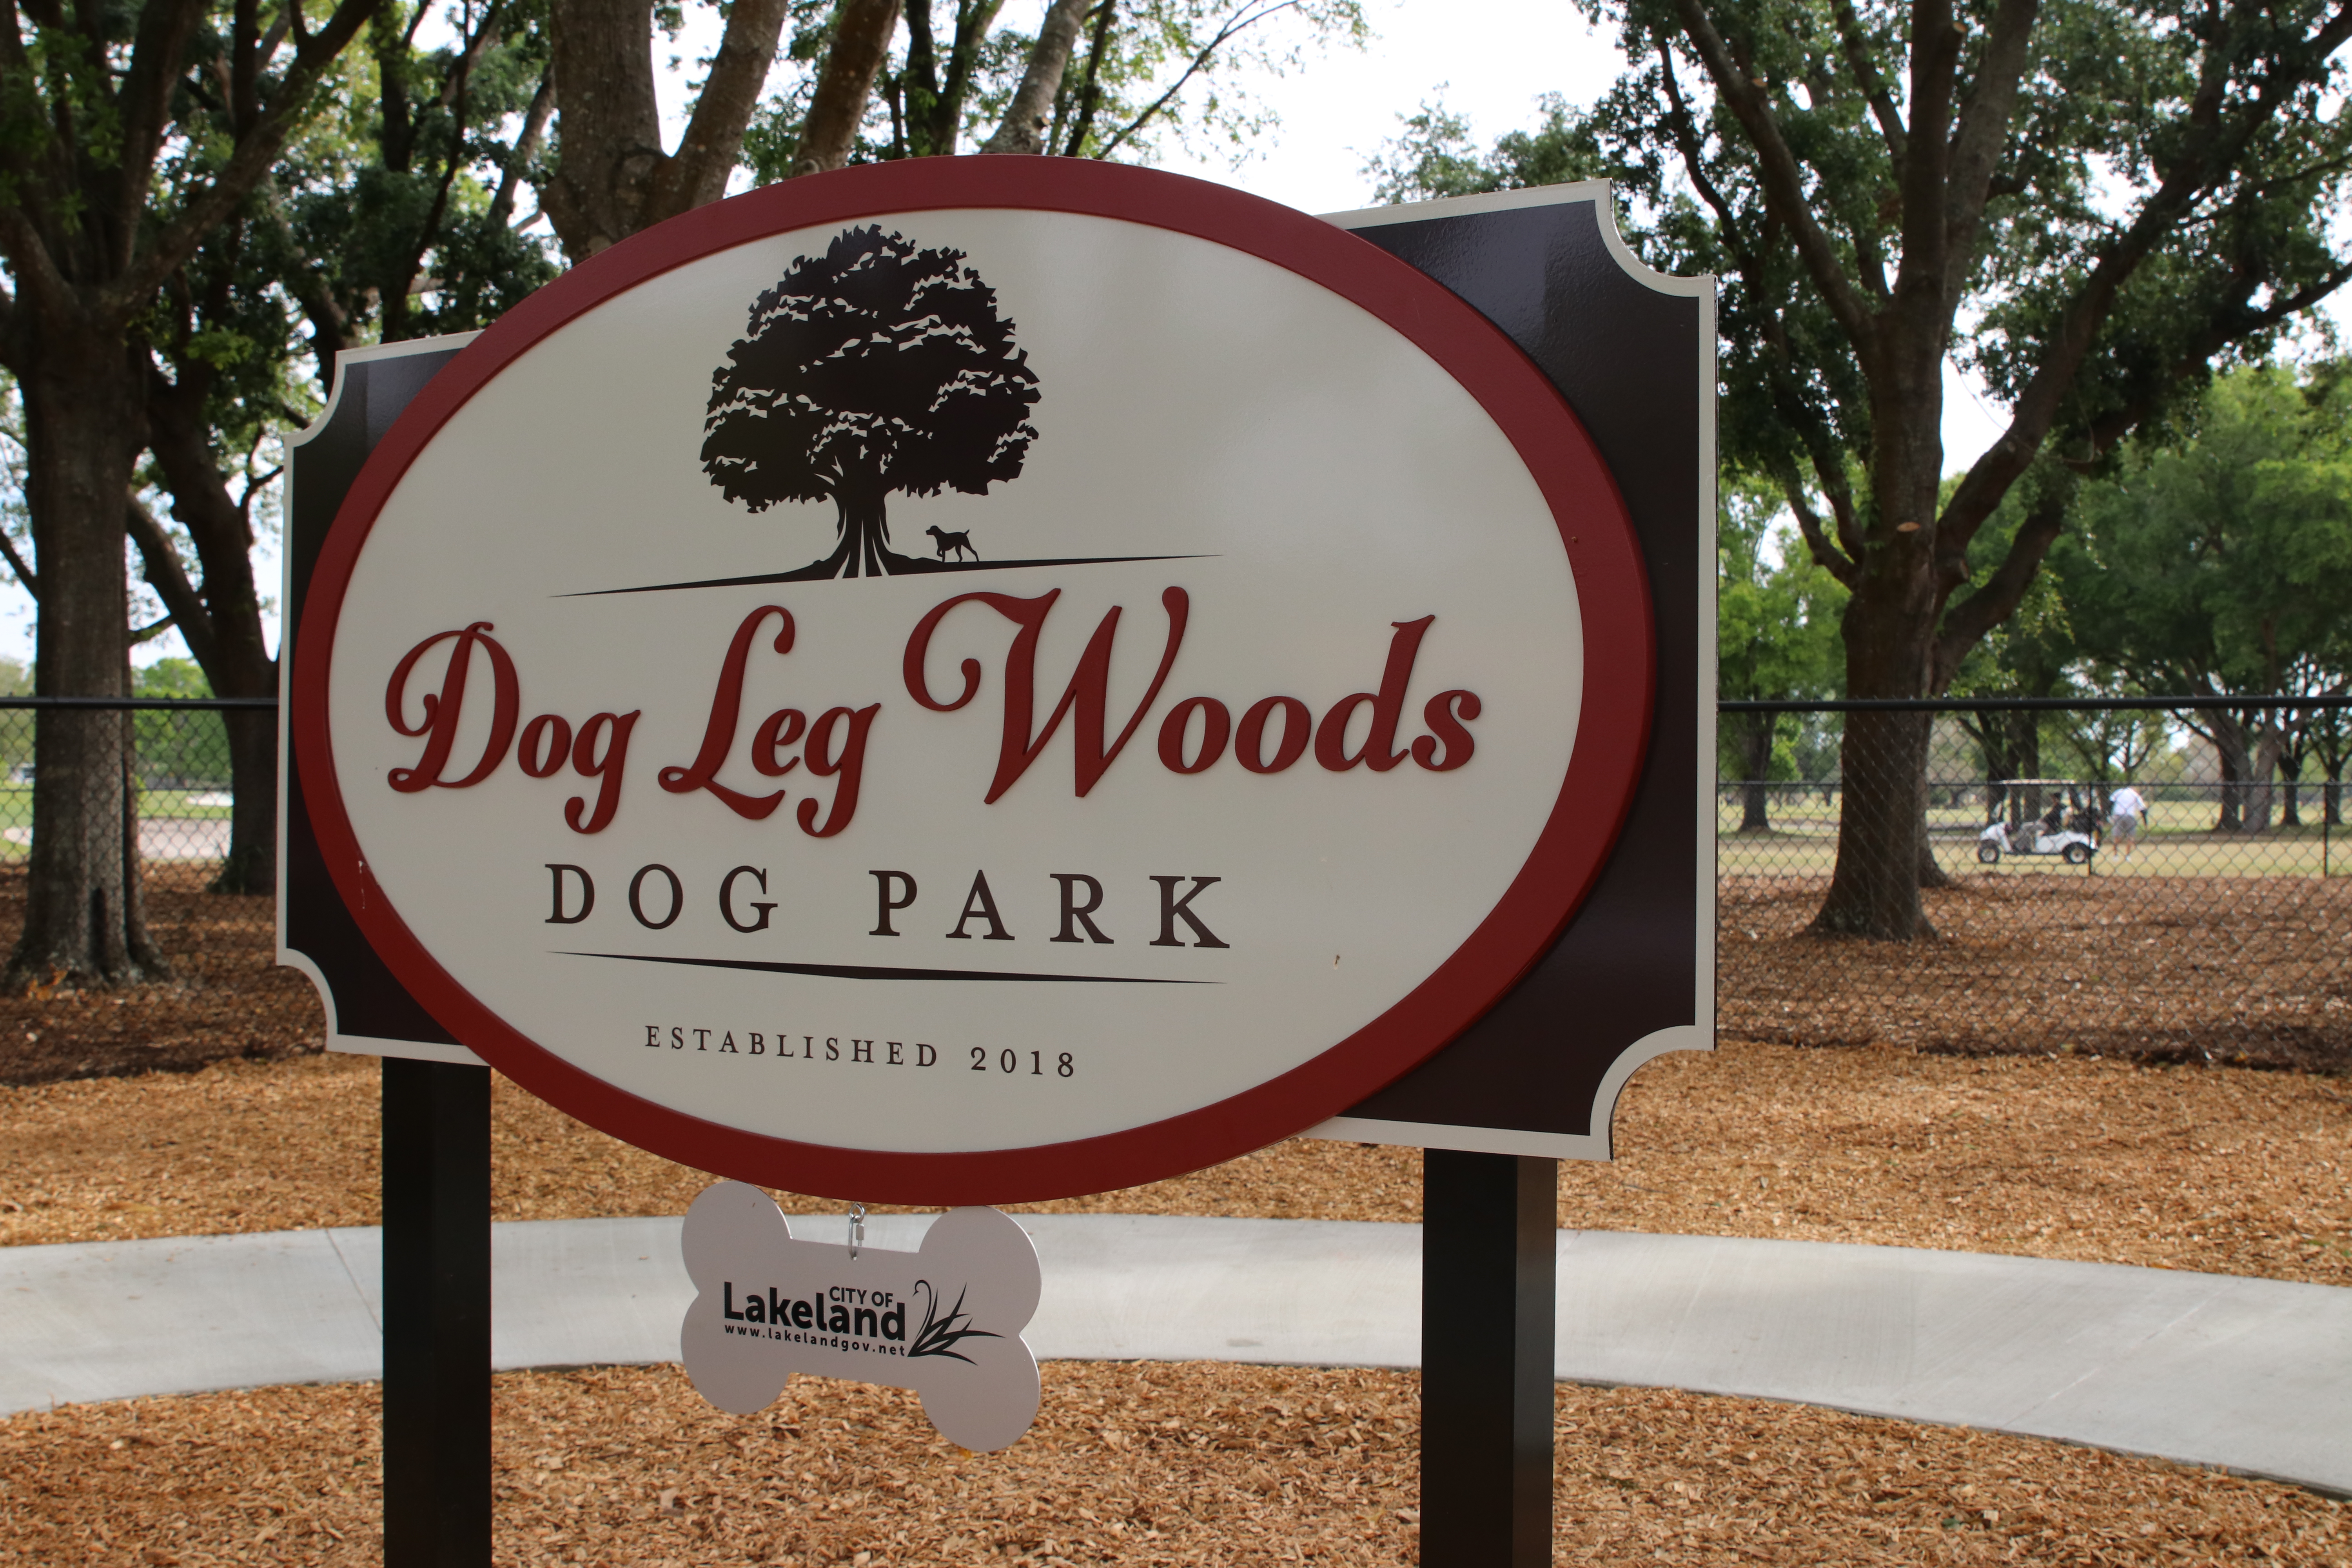 The three-acre Dog Leg Woods dog park opened in March 2018.